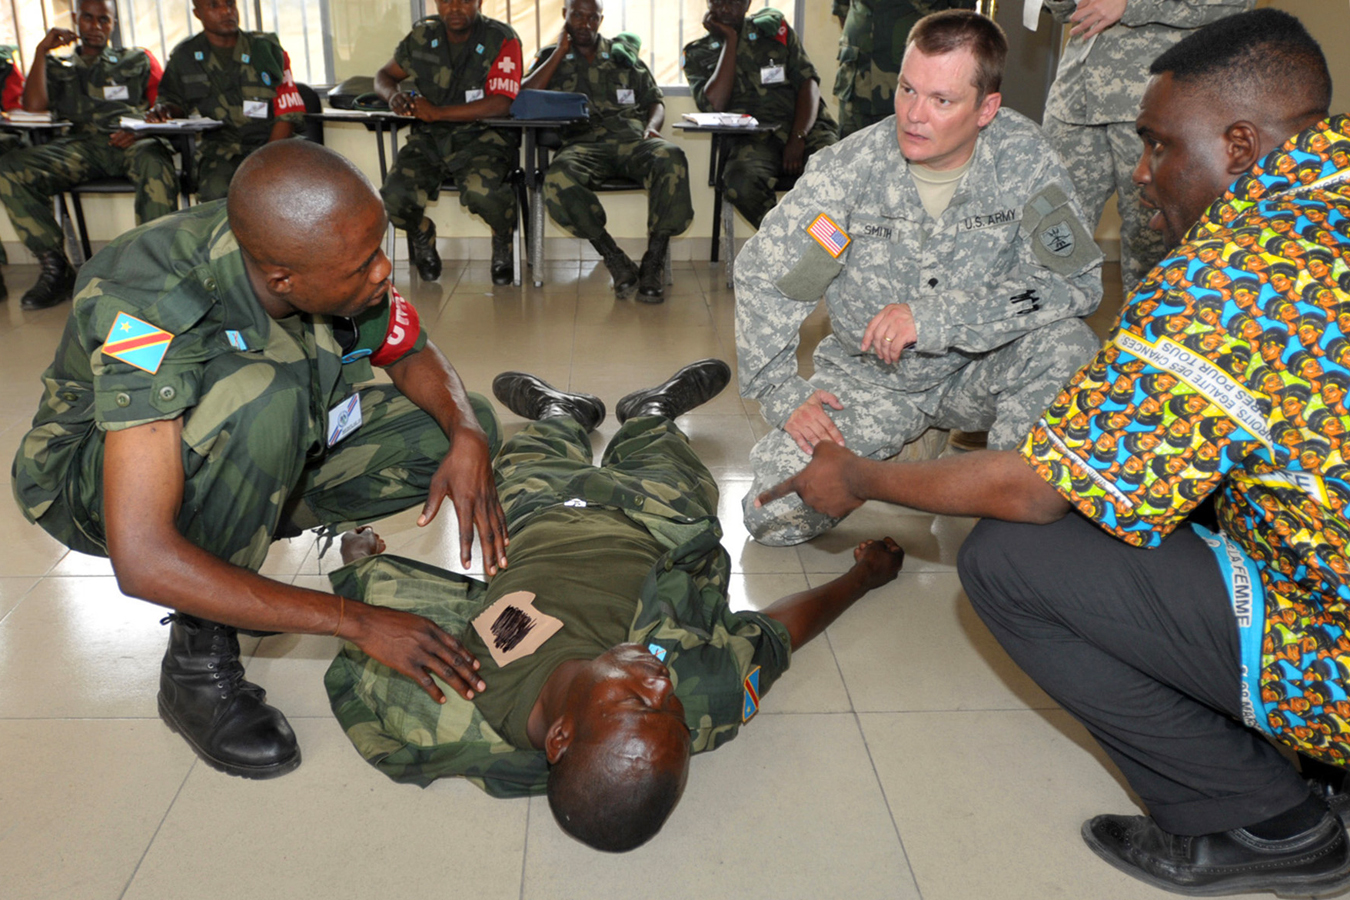 two men are trying to fix a person in a military uniform